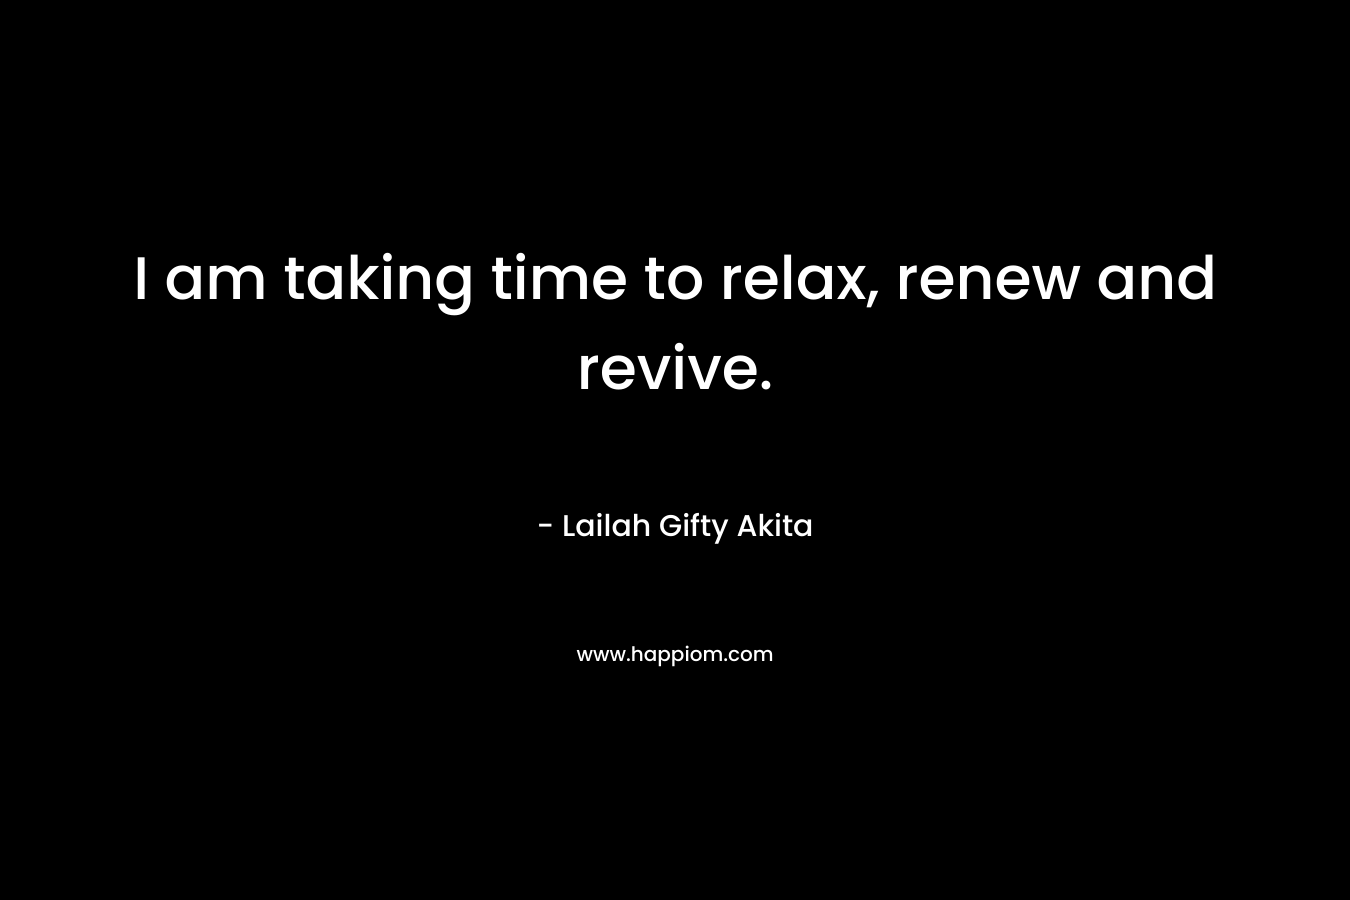 I am taking time to relax, renew and revive.